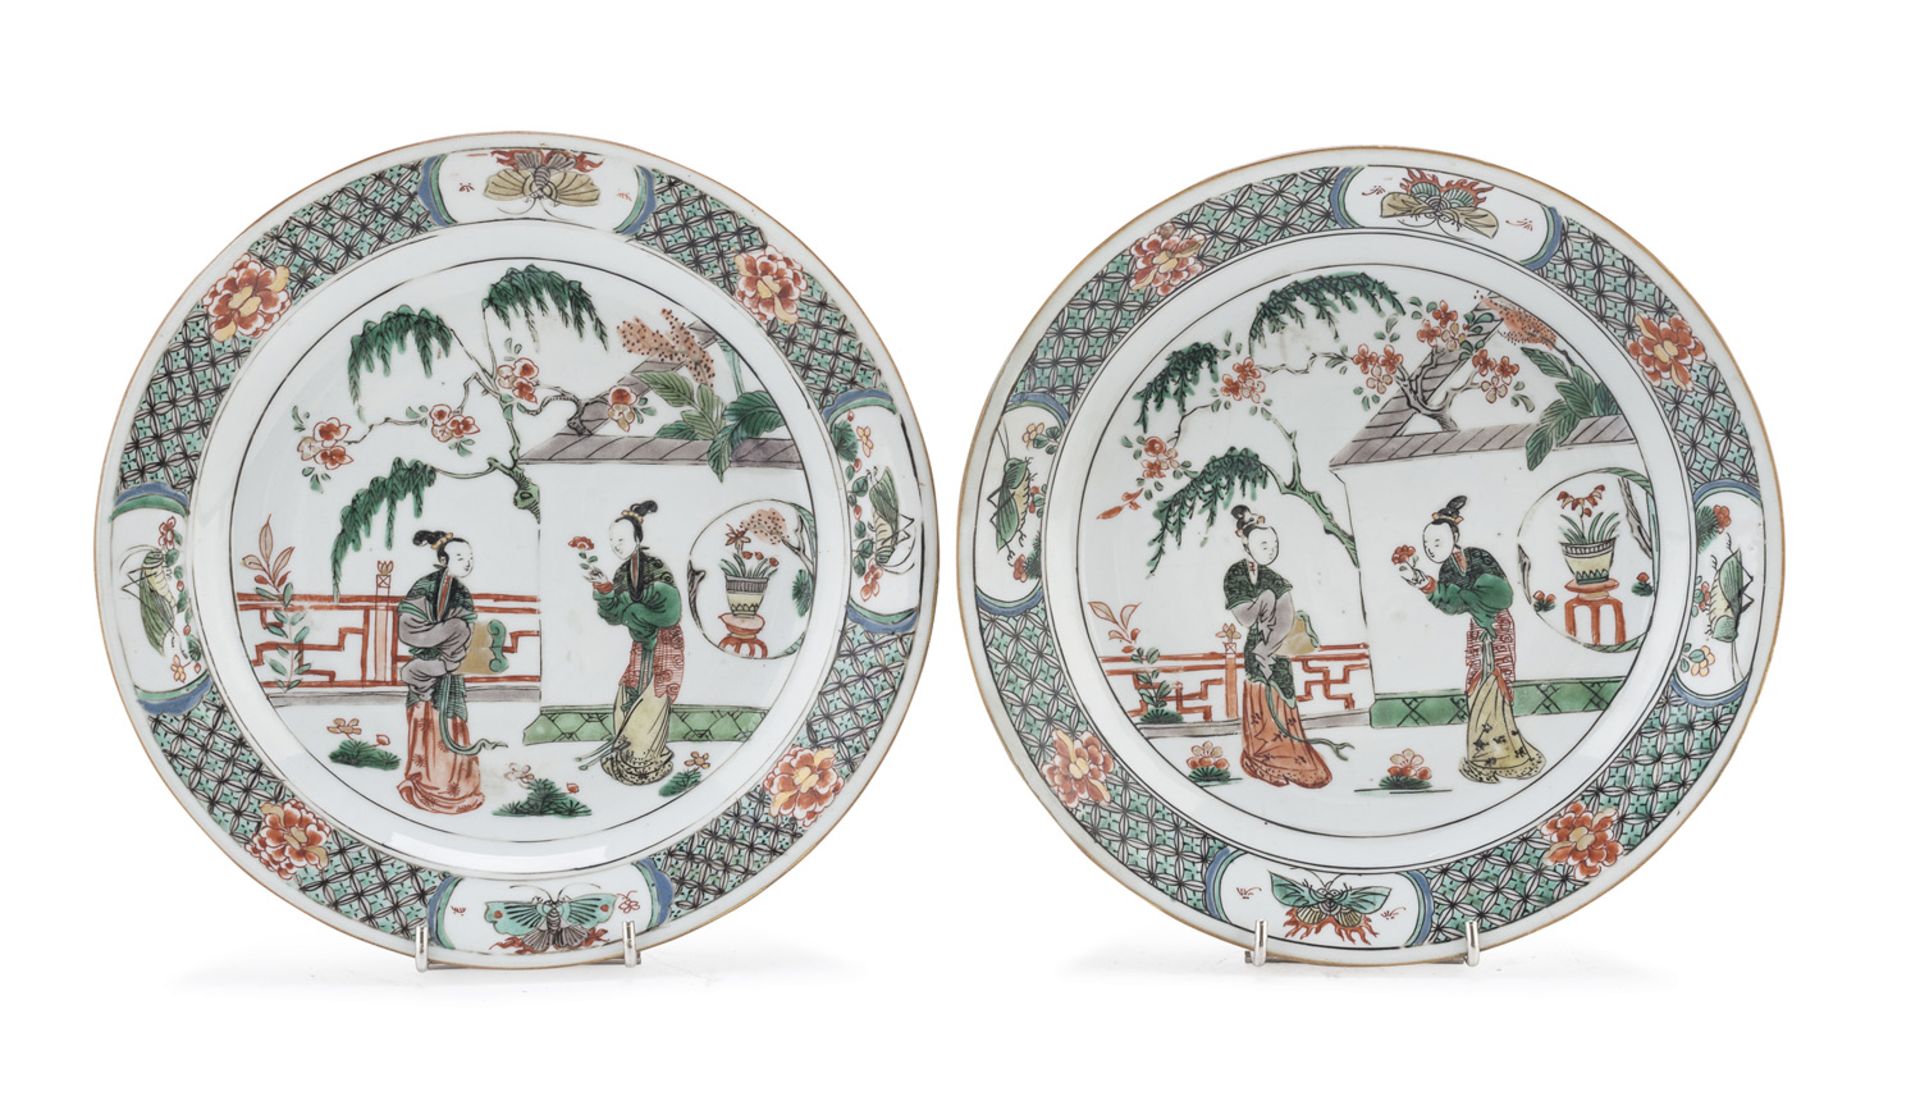 A PAIR OF CHINESE POLYCHROME AND GOLD PORCELAIN DISHES EARLY 18TH CENTURY.